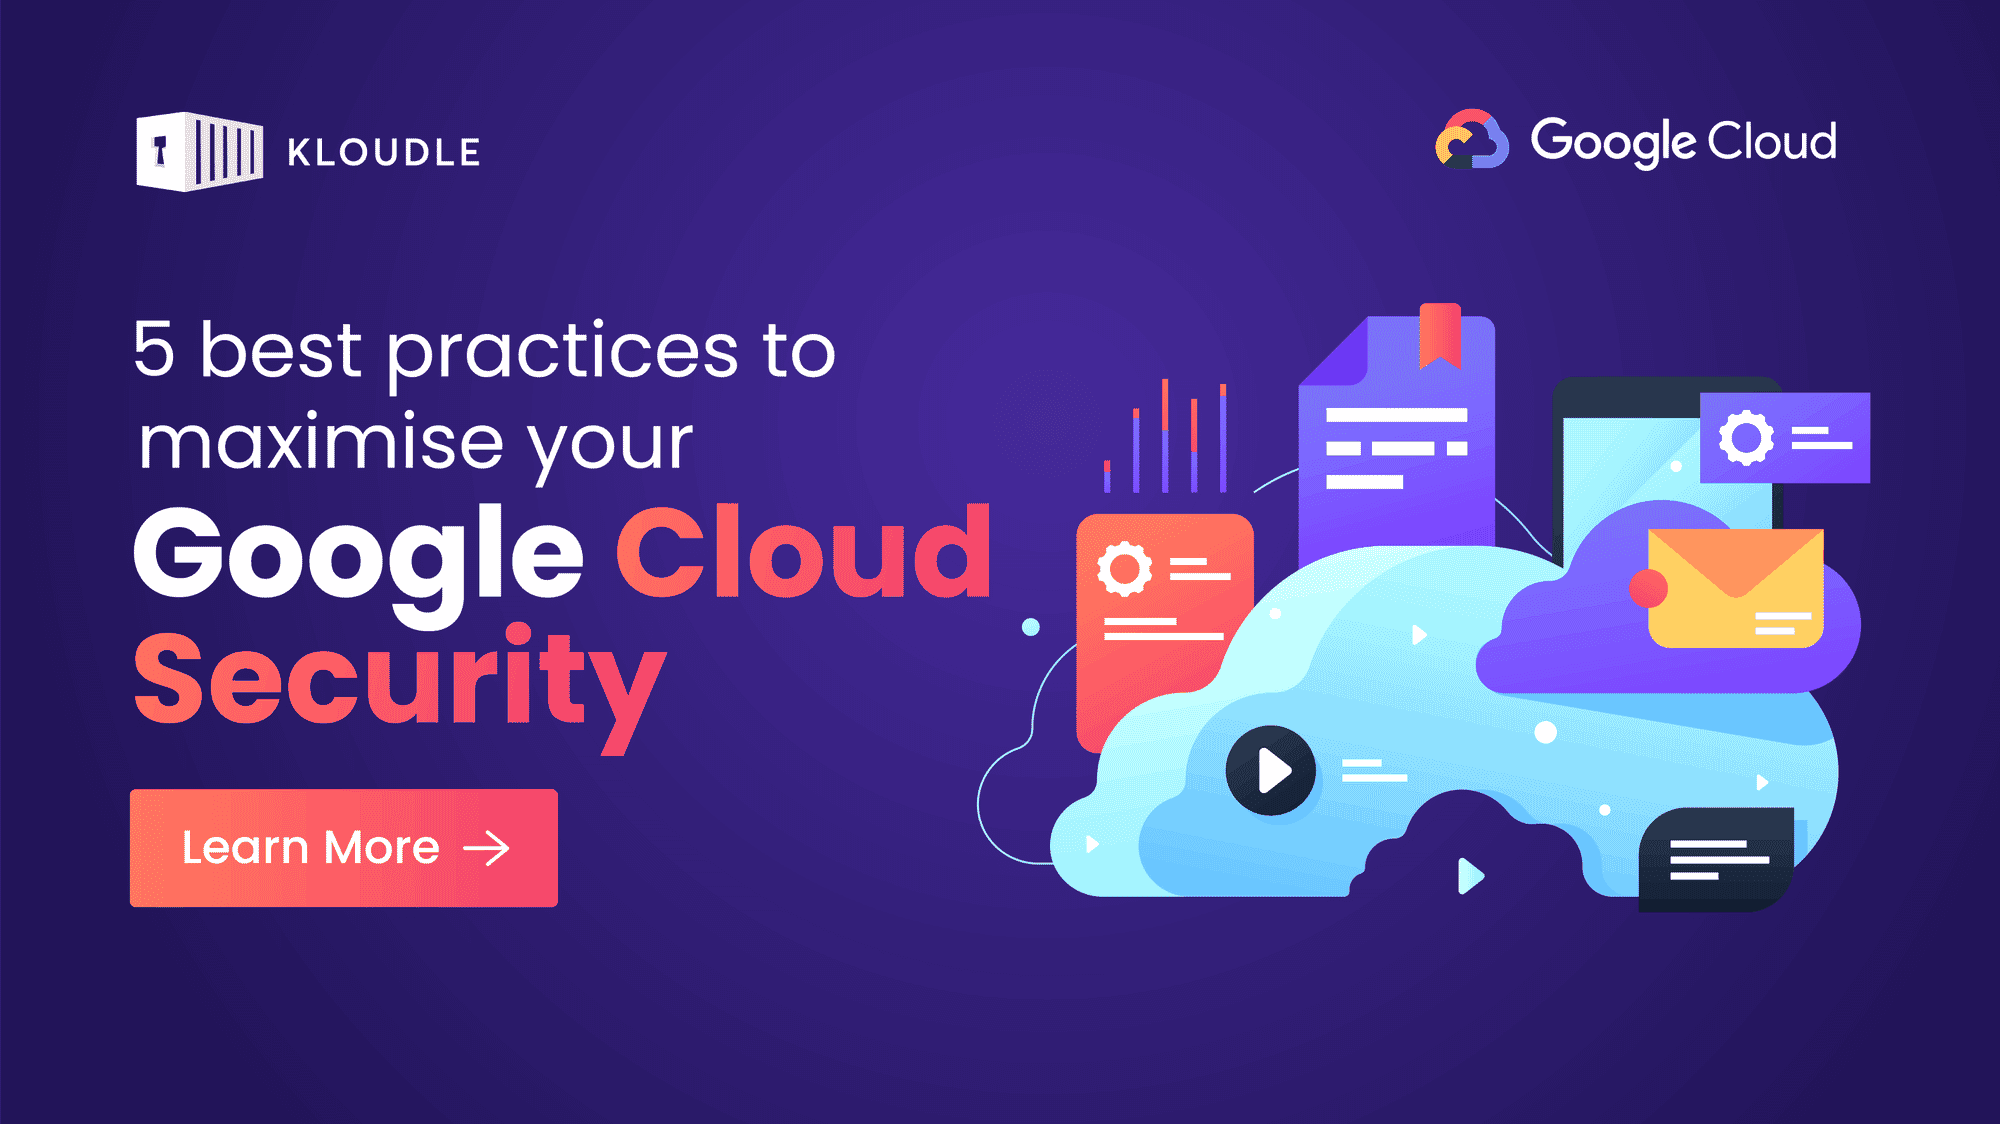 5 Best Practices to Maximize your Google Cloud Security